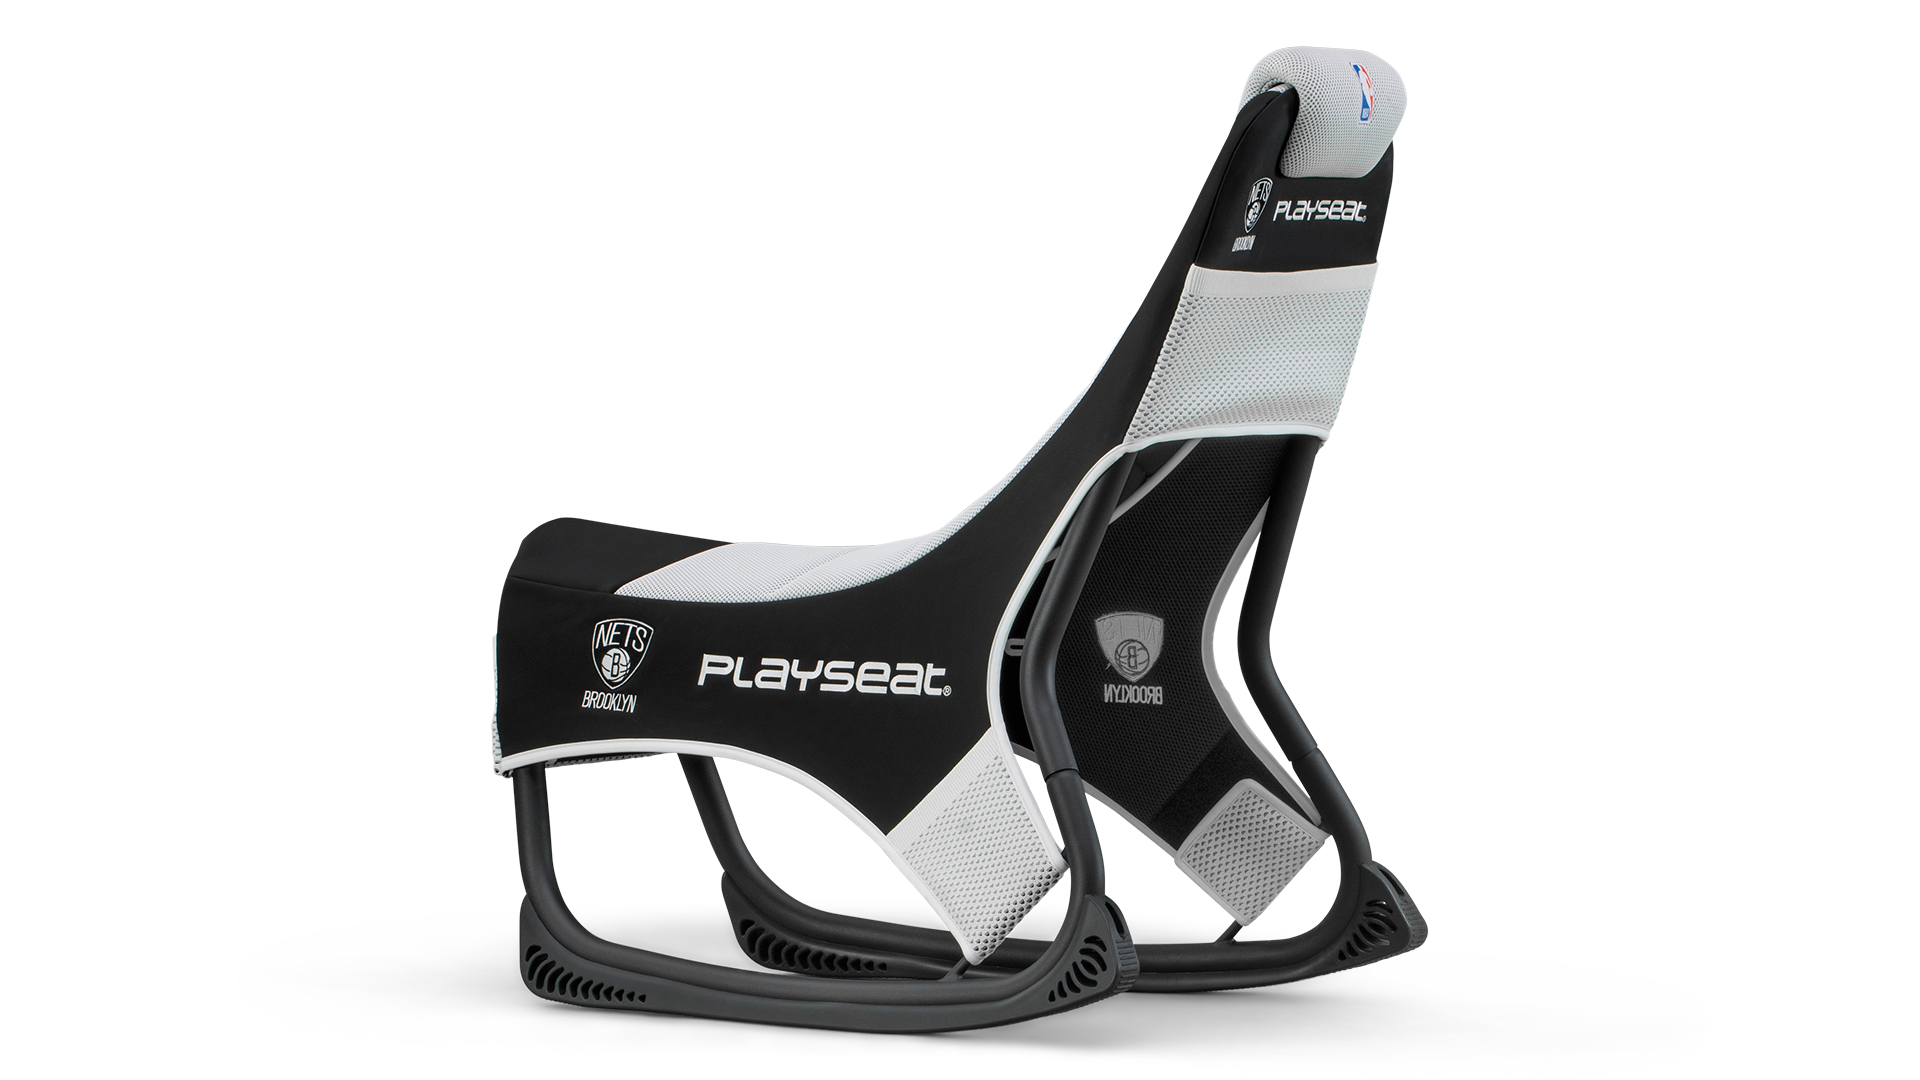 playseat-go-nba-brooklyn-nets-gaming-seat-back-angle-view-1920x1080-1.png